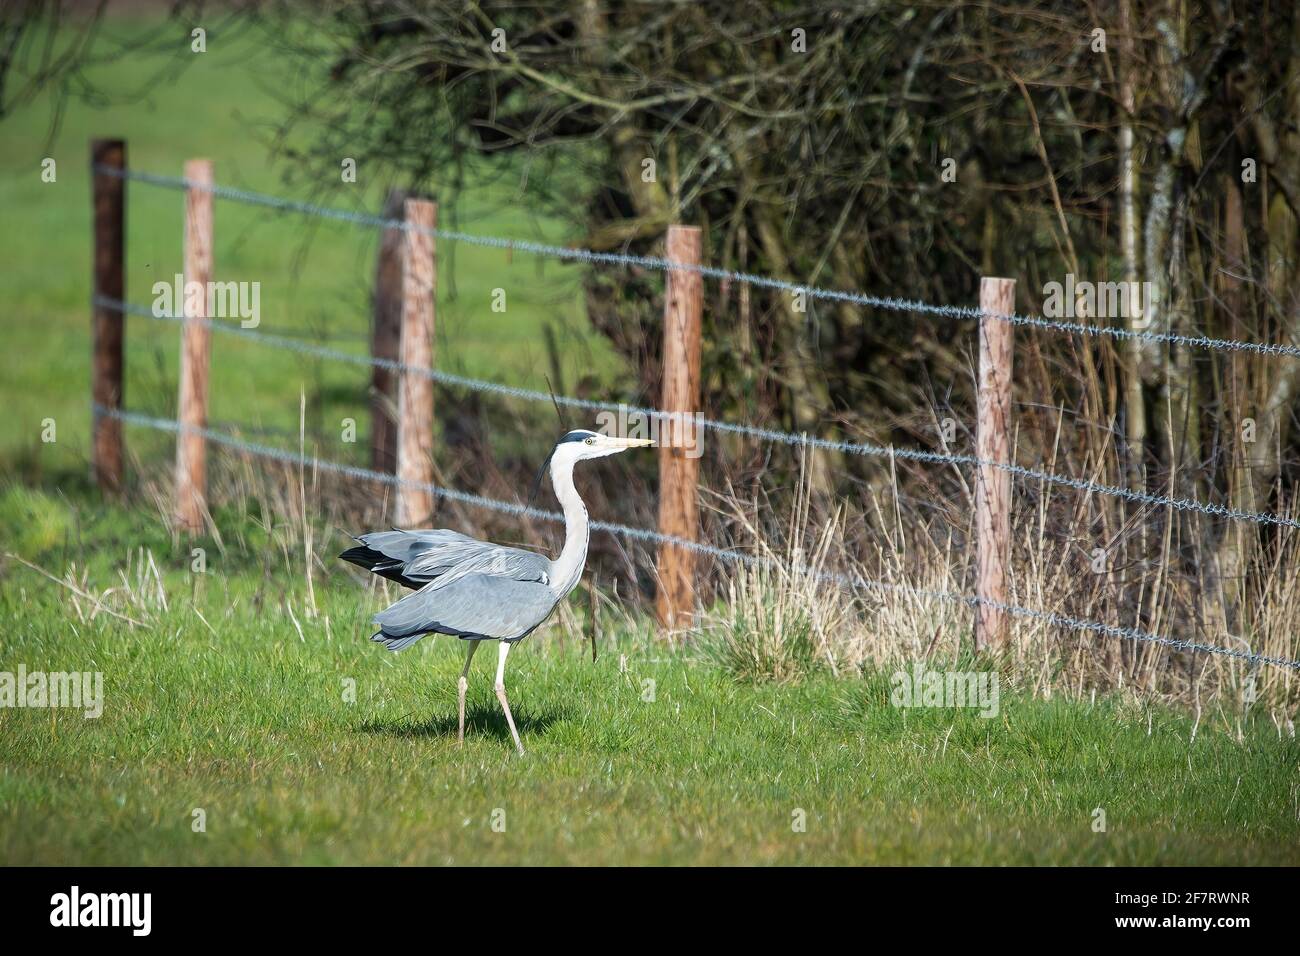 A Single Grey Heron standing in a field spreading its wings Stock Photo